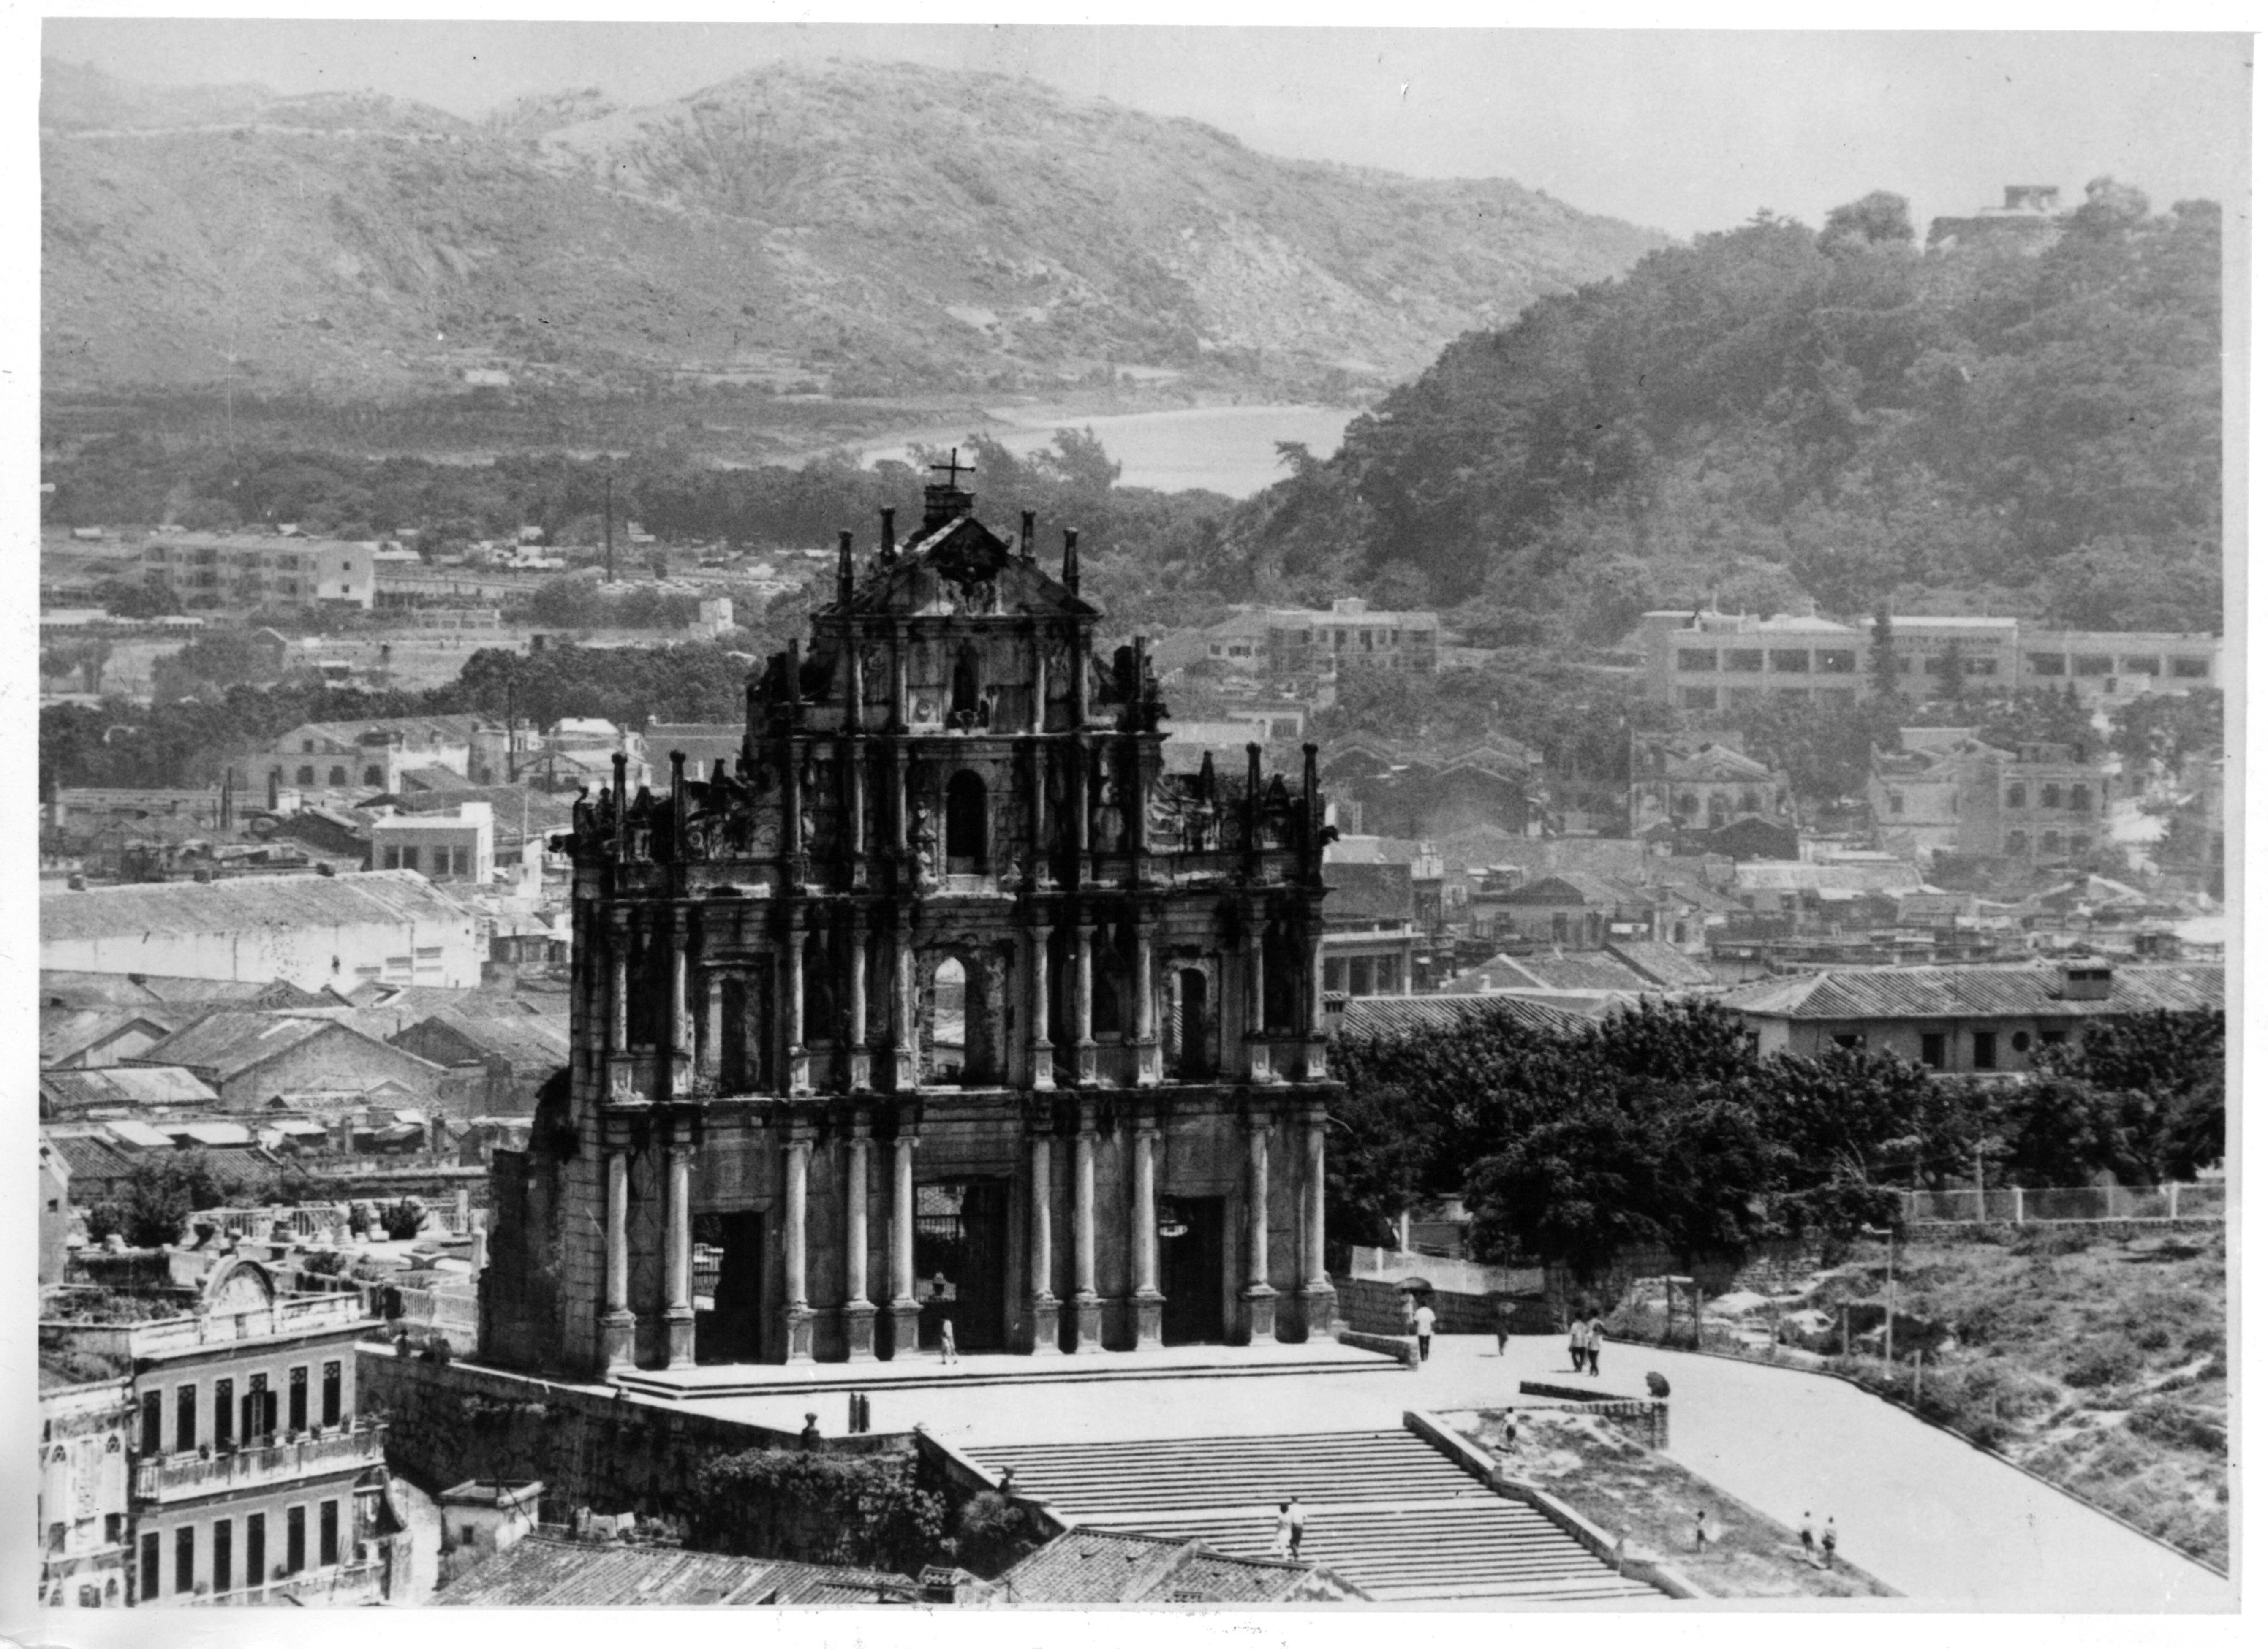 The Ruins of St. Paul’s in Macau. The former Portuguese enclave became a sanctuary for hundreds of thousands of refugees during World War II, including Jewish refugees from Shanghai. Photo: Getty Images